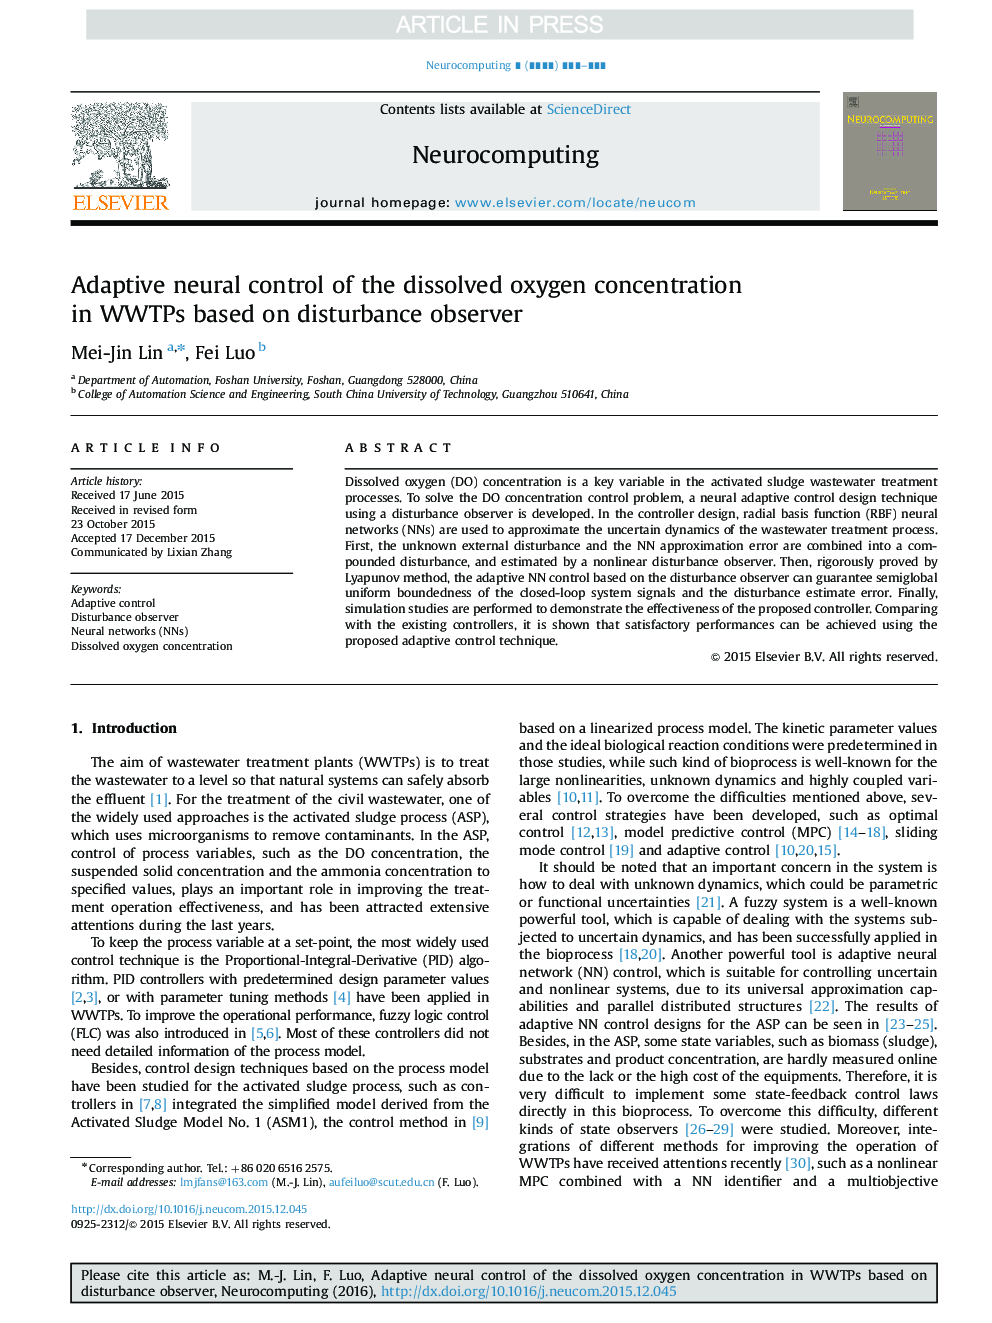 Adaptive neural control of the dissolved oxygen concentration in WWTPs based on disturbance observer